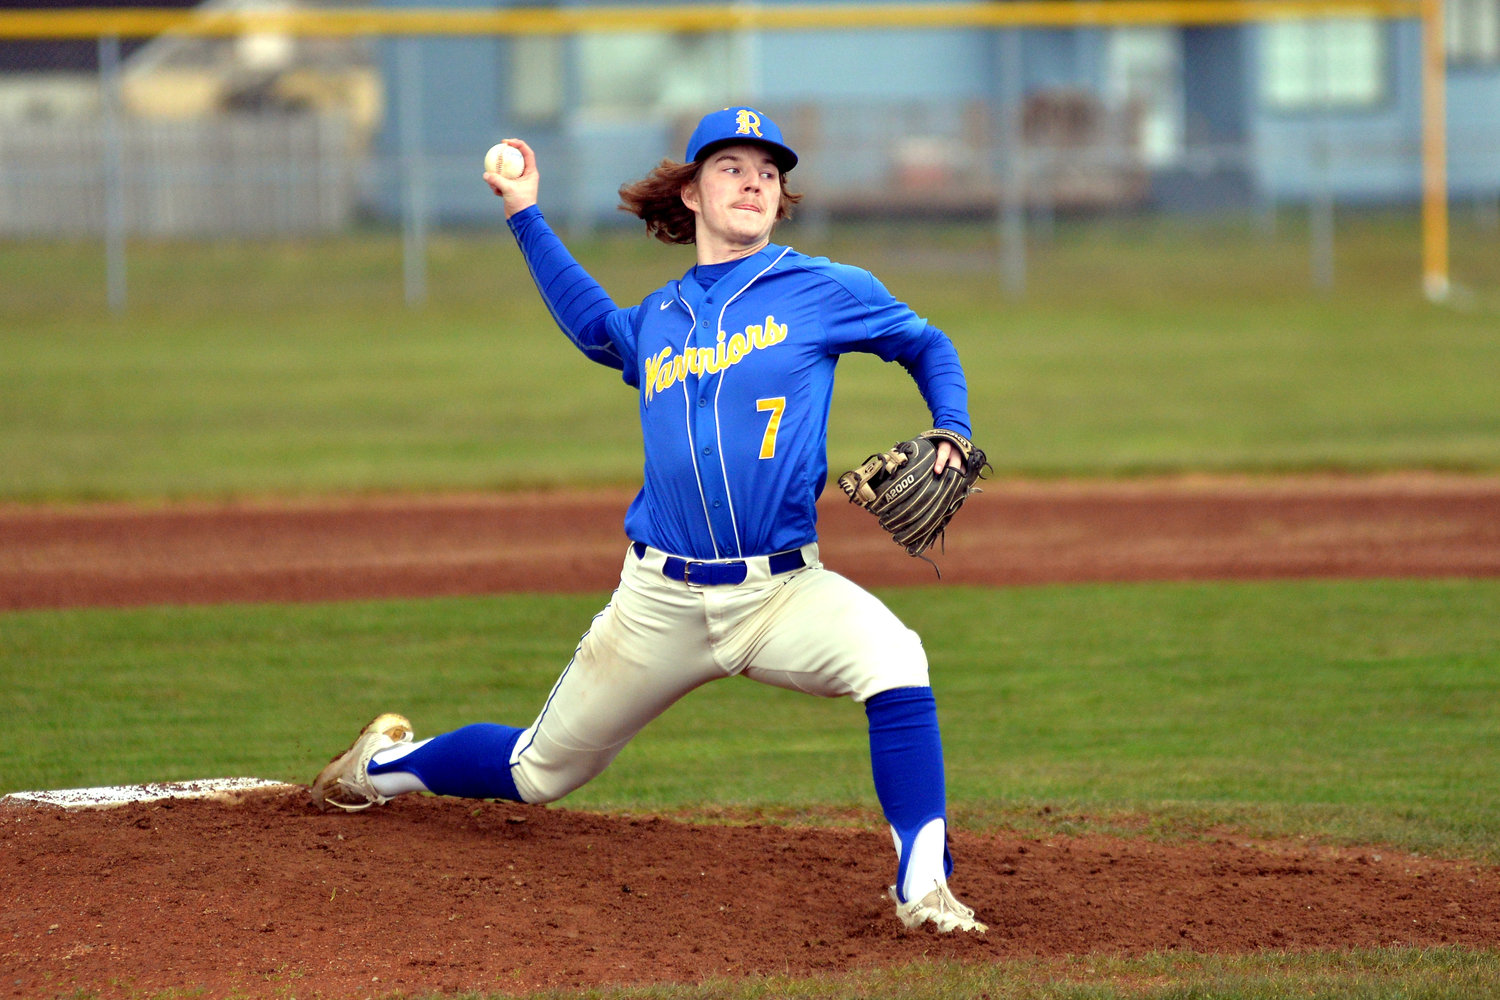 Rochester’s Braden Hartley delivers a pitch to an Aberdeen batter during a road game on April 14.